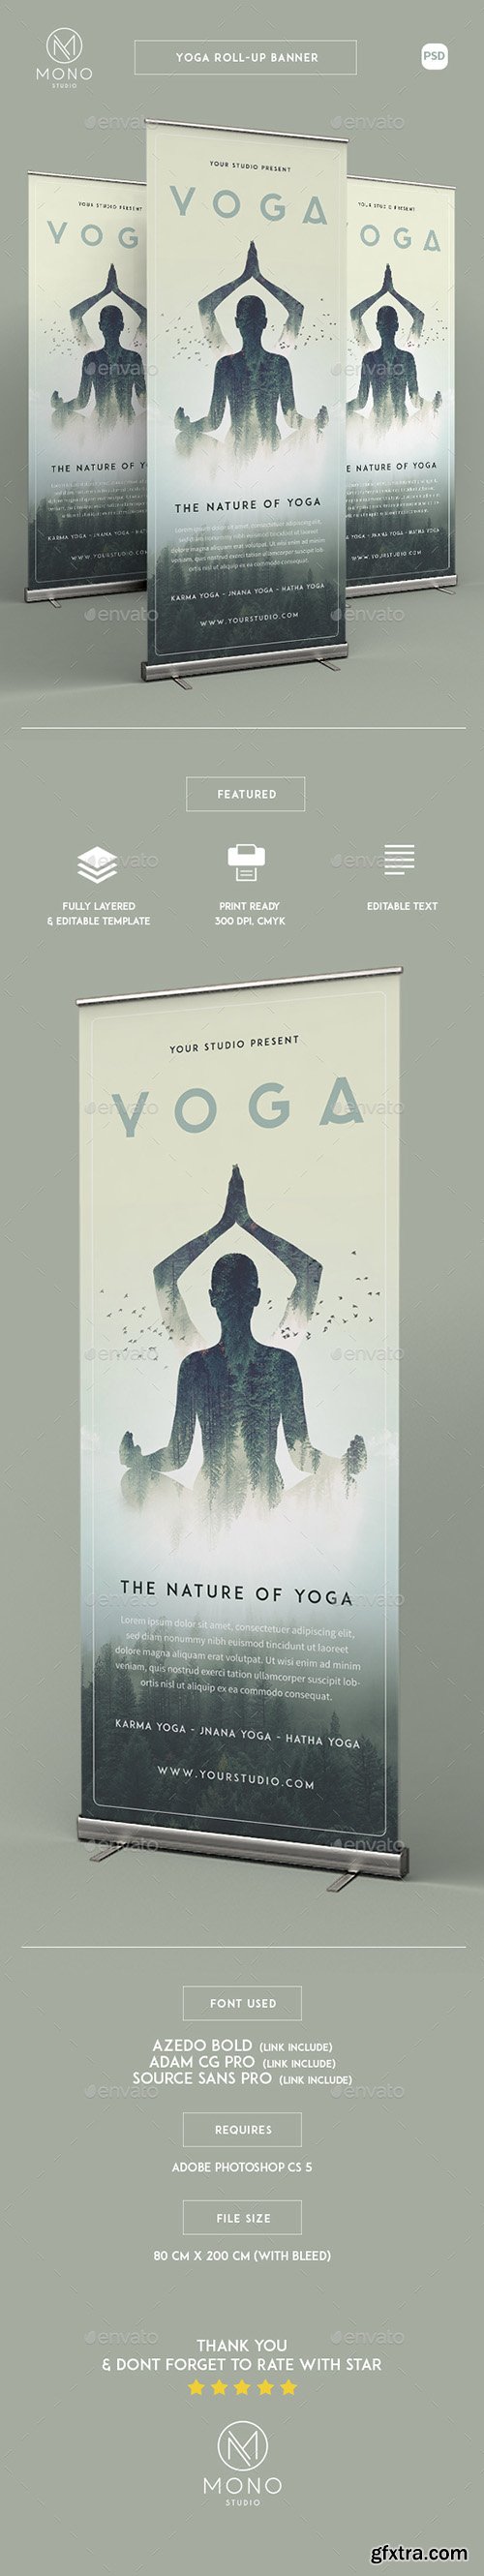 Graphicriver Yoga Roll-up Banner 16382639